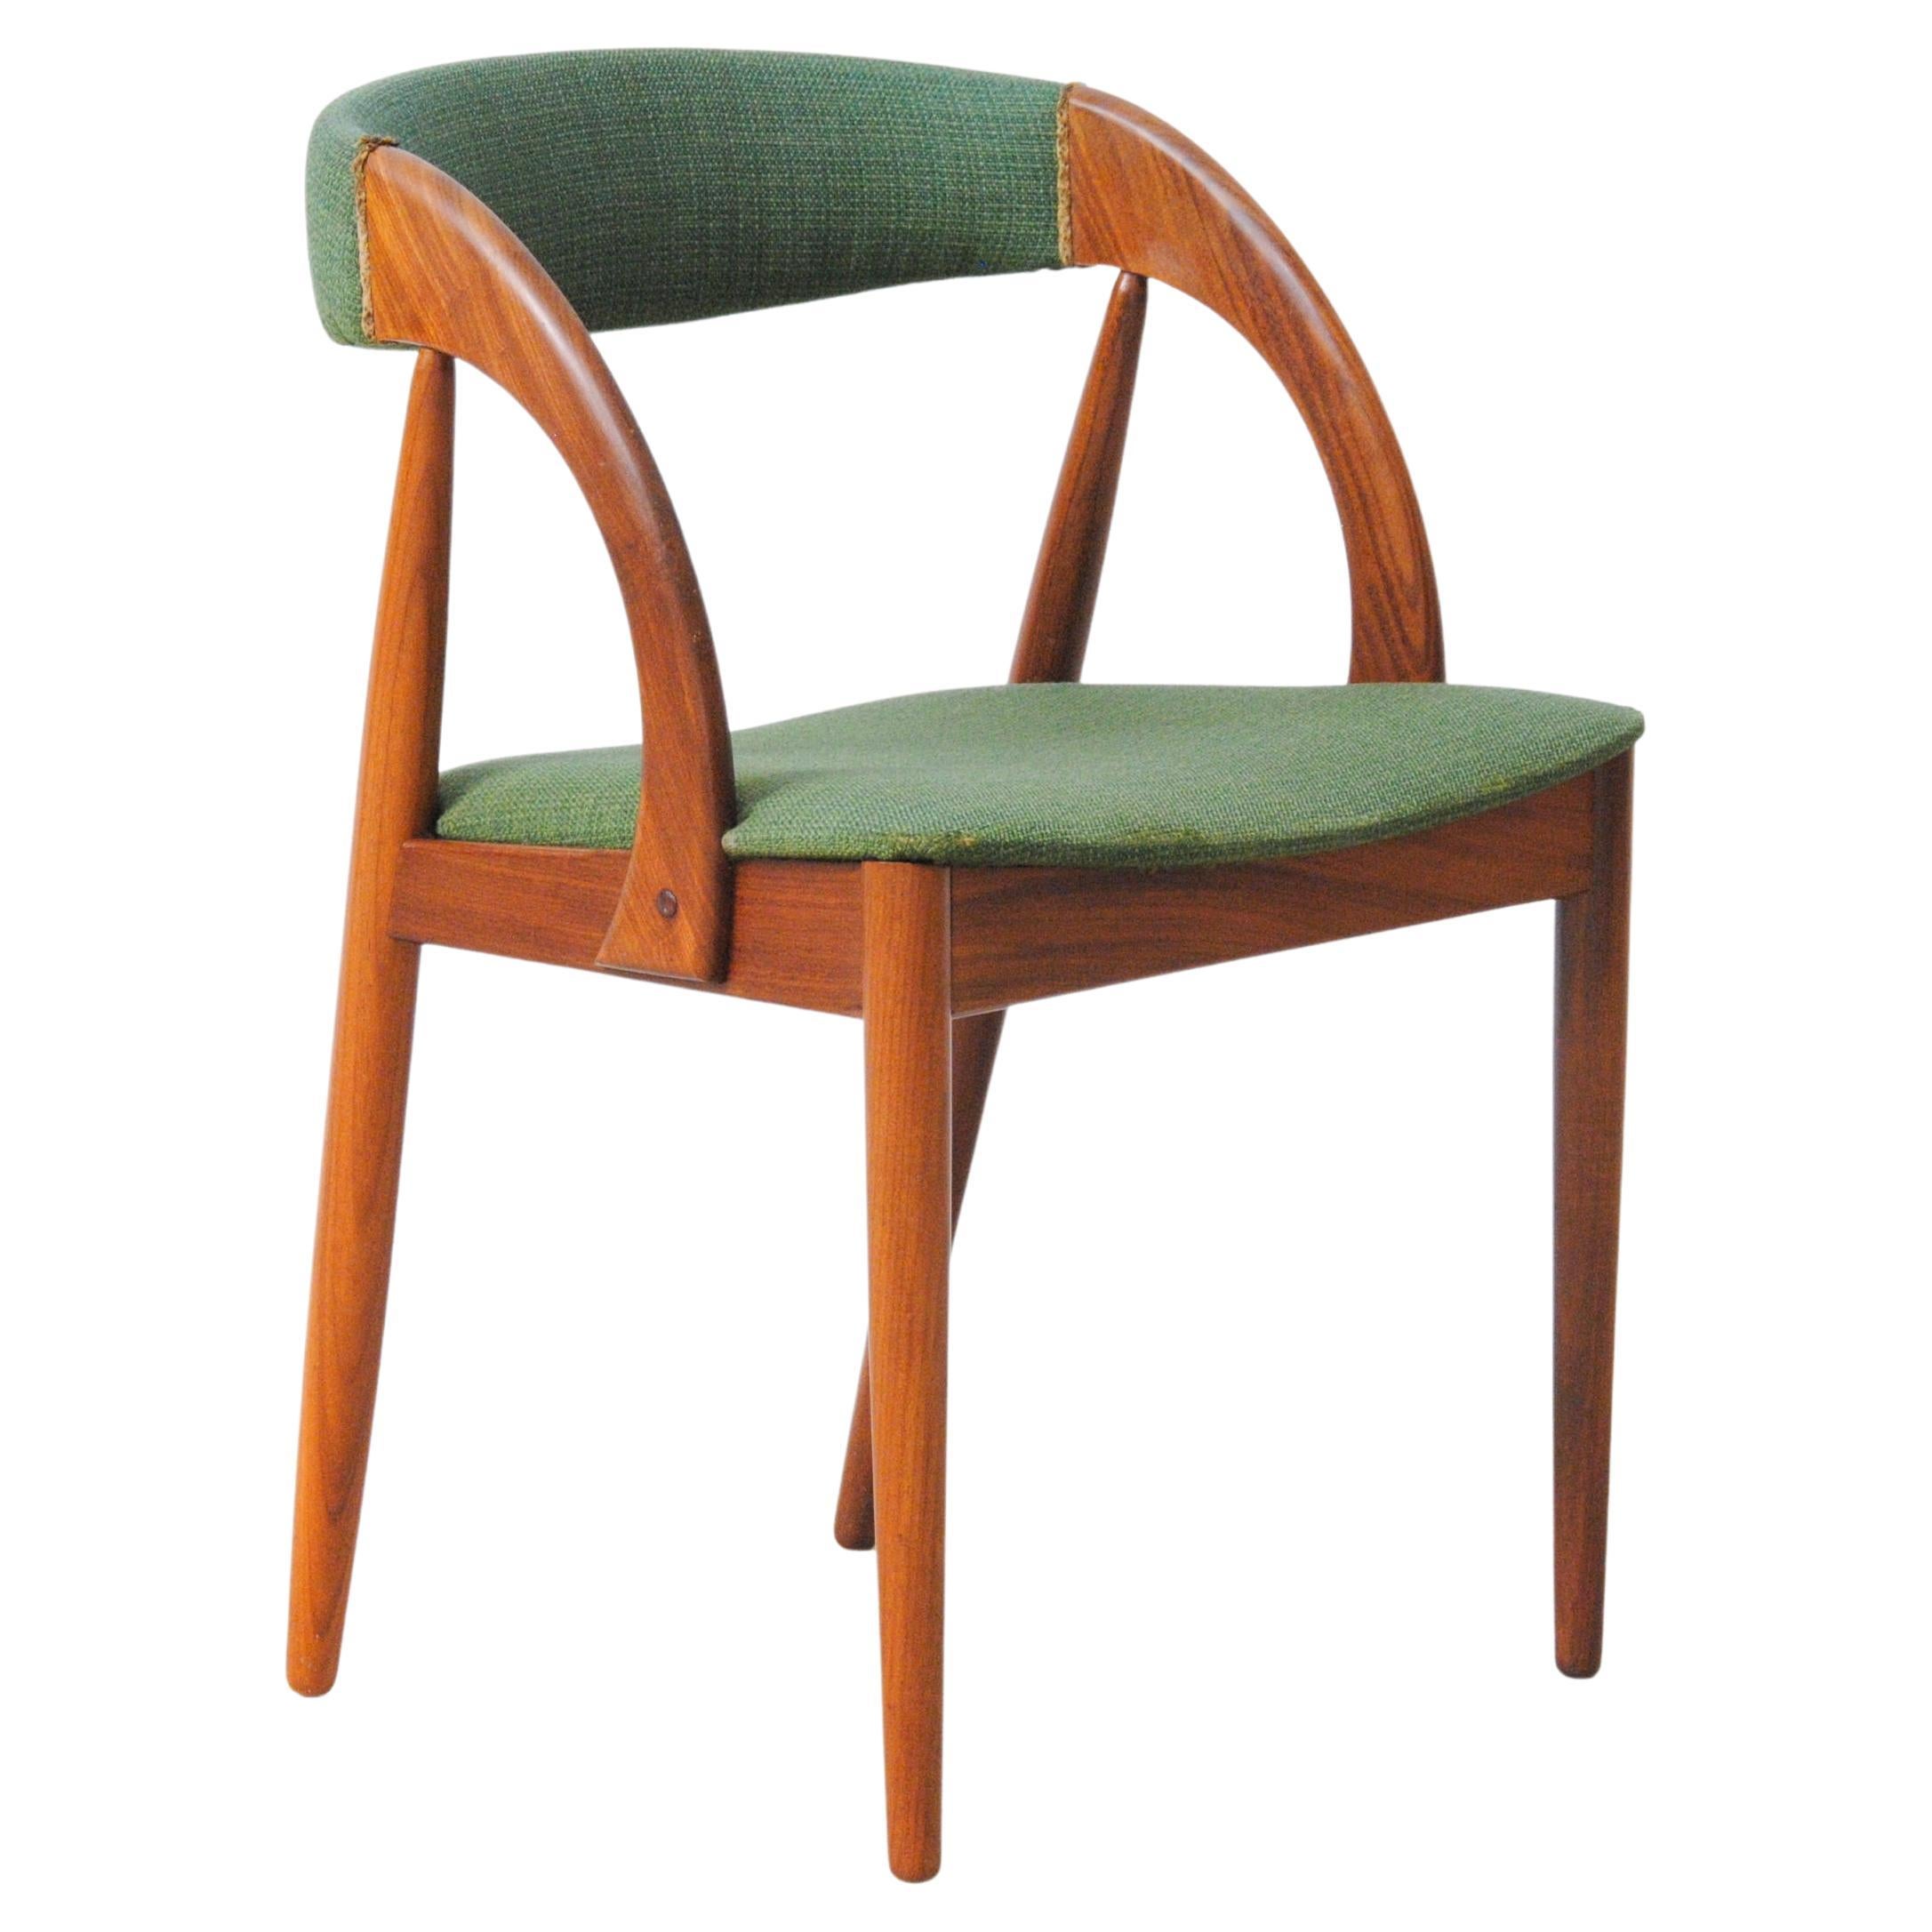 Restored Refinished Danish Johannes Andersen Chair Custom Reupholstery Included